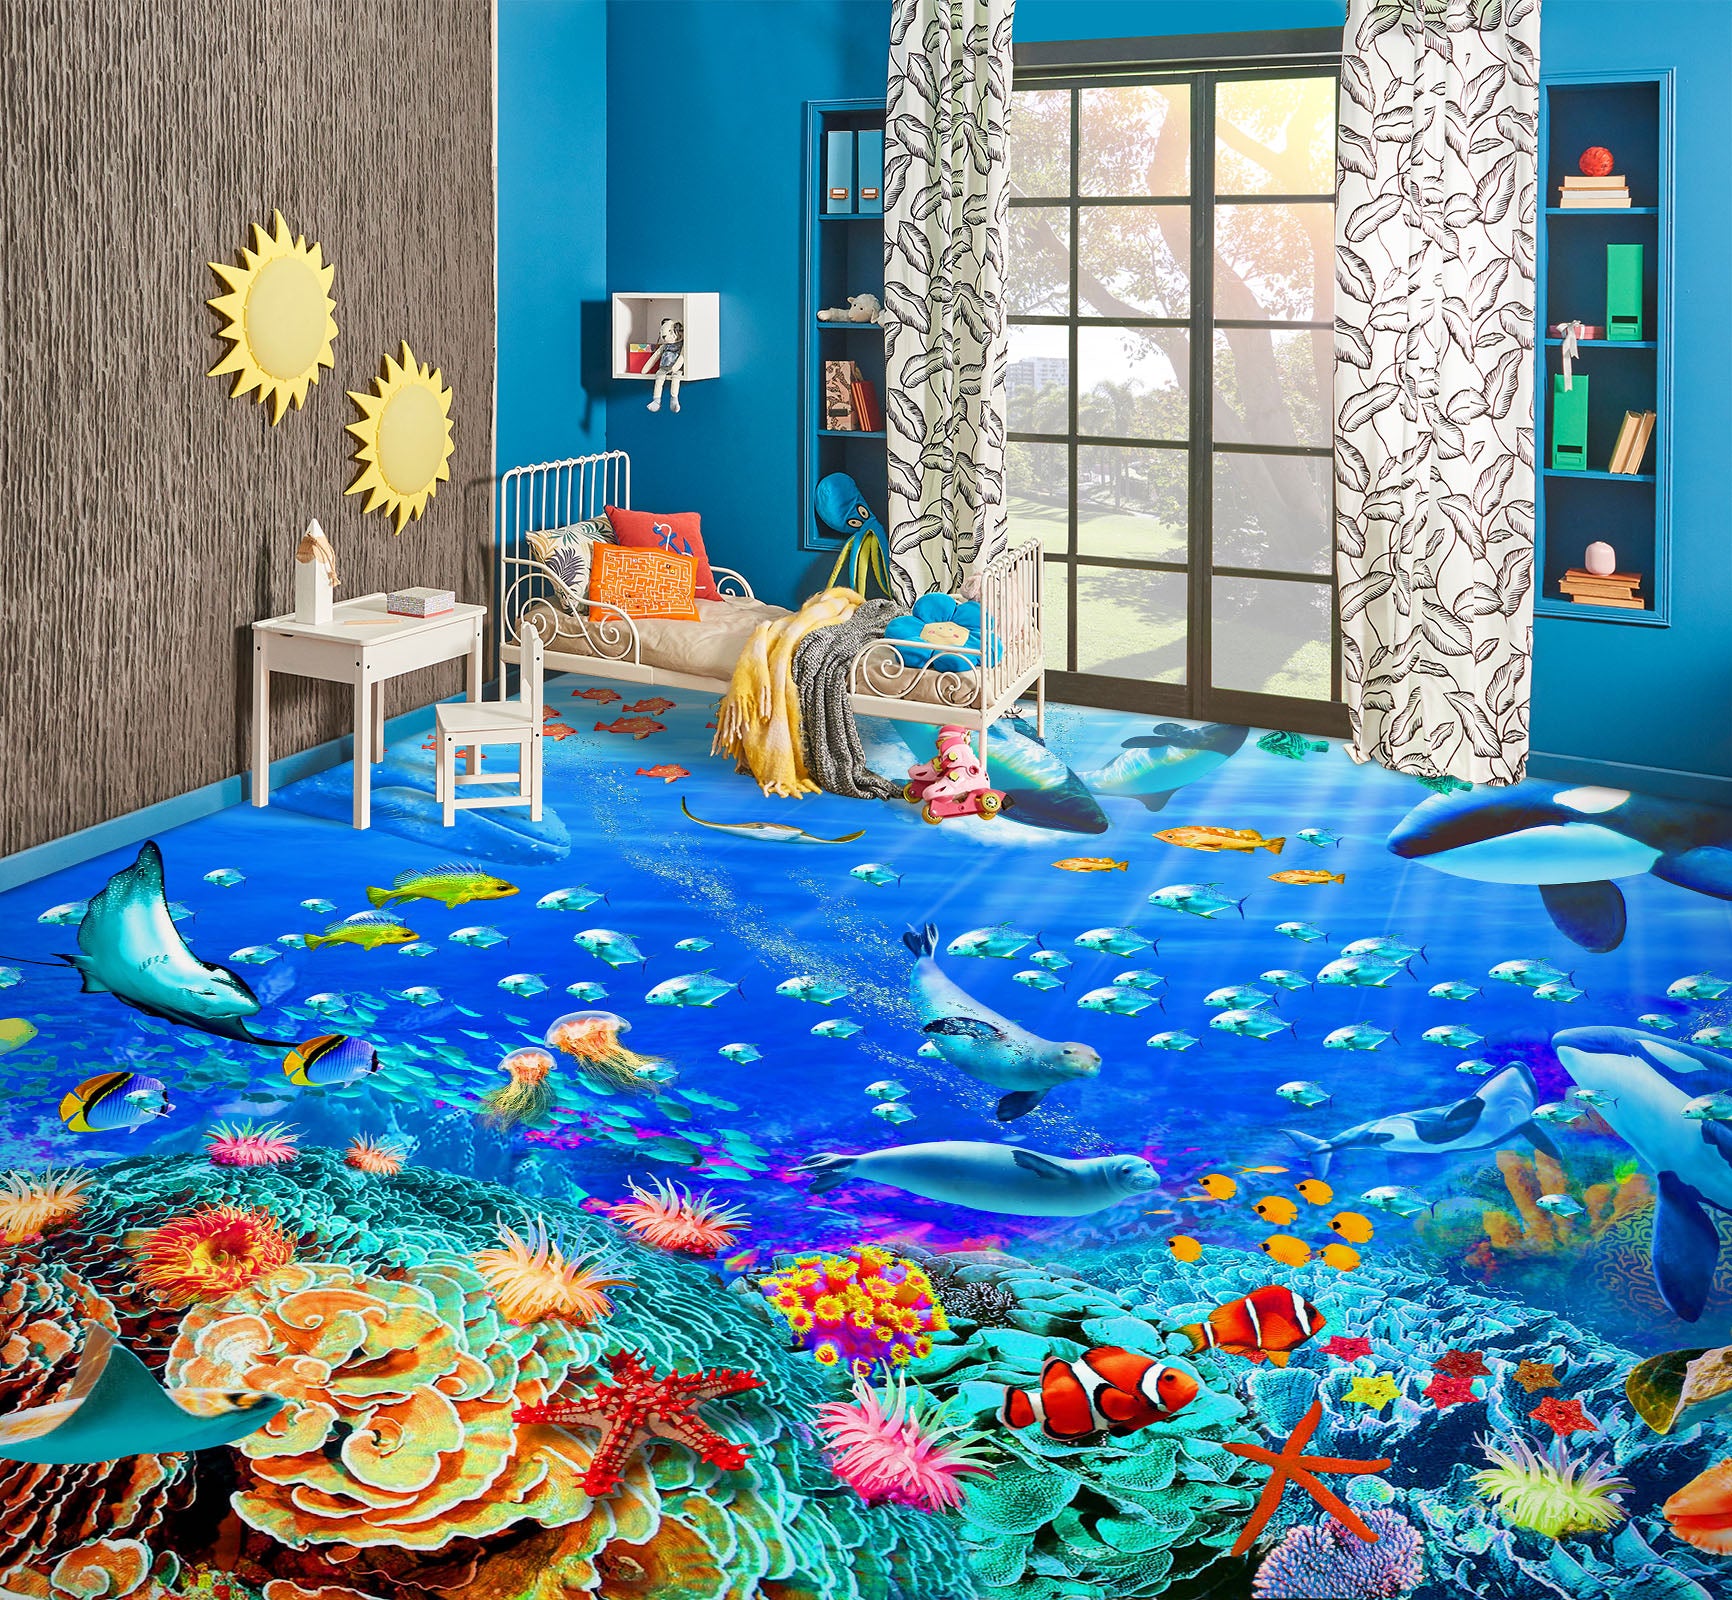 3D Sea Whale Seal Fish Coral 96212 Adrian Chesterman Floor Mural  Wallpaper Murals Self-Adhesive Removable Print Epoxy